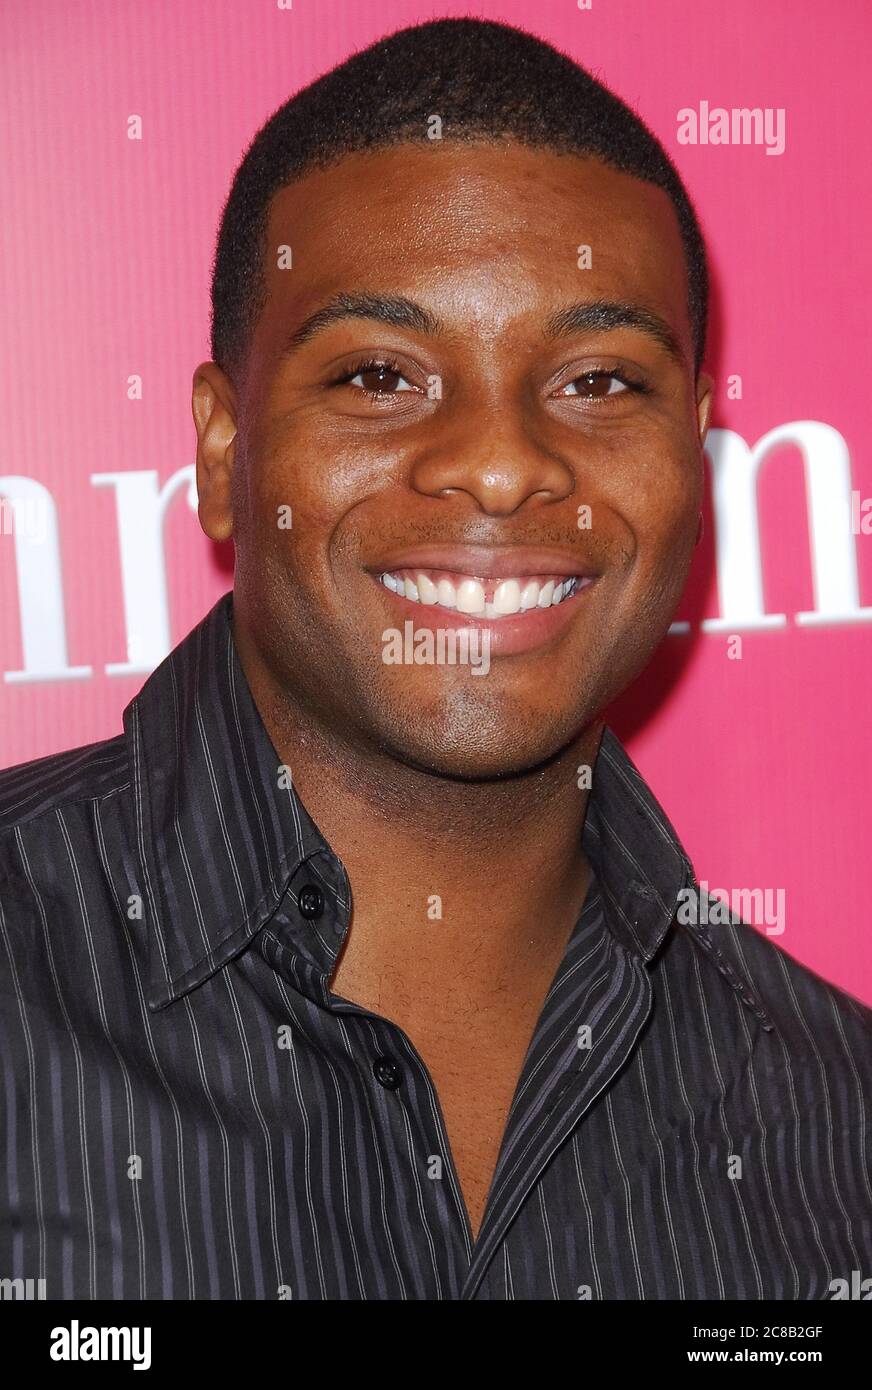 Kel Mitchell at the World Premiere of 'This Christmas' held at the Cinerama Dome in Hollywood, CA. The event took place on Monday, November 12, 2007. Photo by: SBM / PictureLux - File Reference # 34006-10432SBMPLX Stock Photo